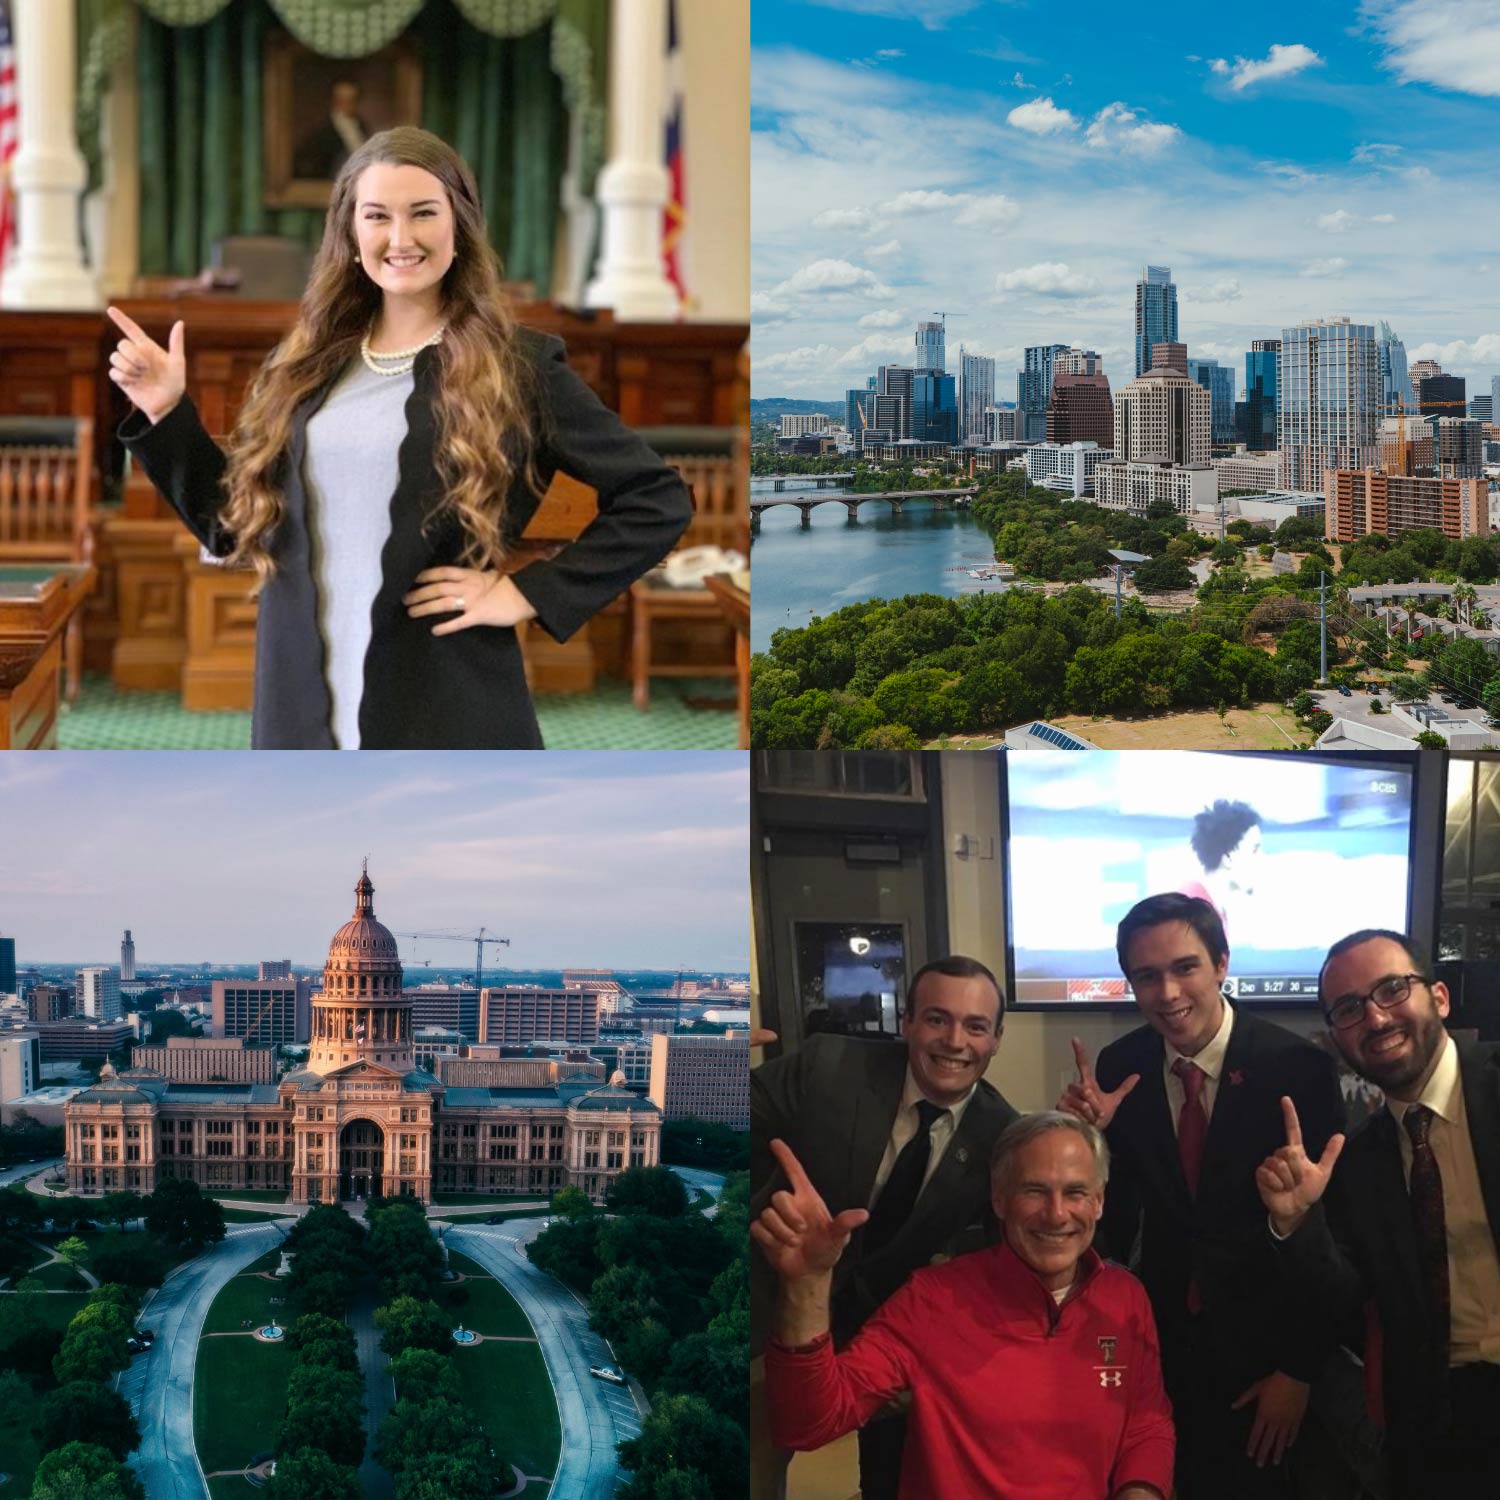 Intern in House Chamber, City Skyline, Texas Capitol Building, Tech Interns with Gov. Abbott